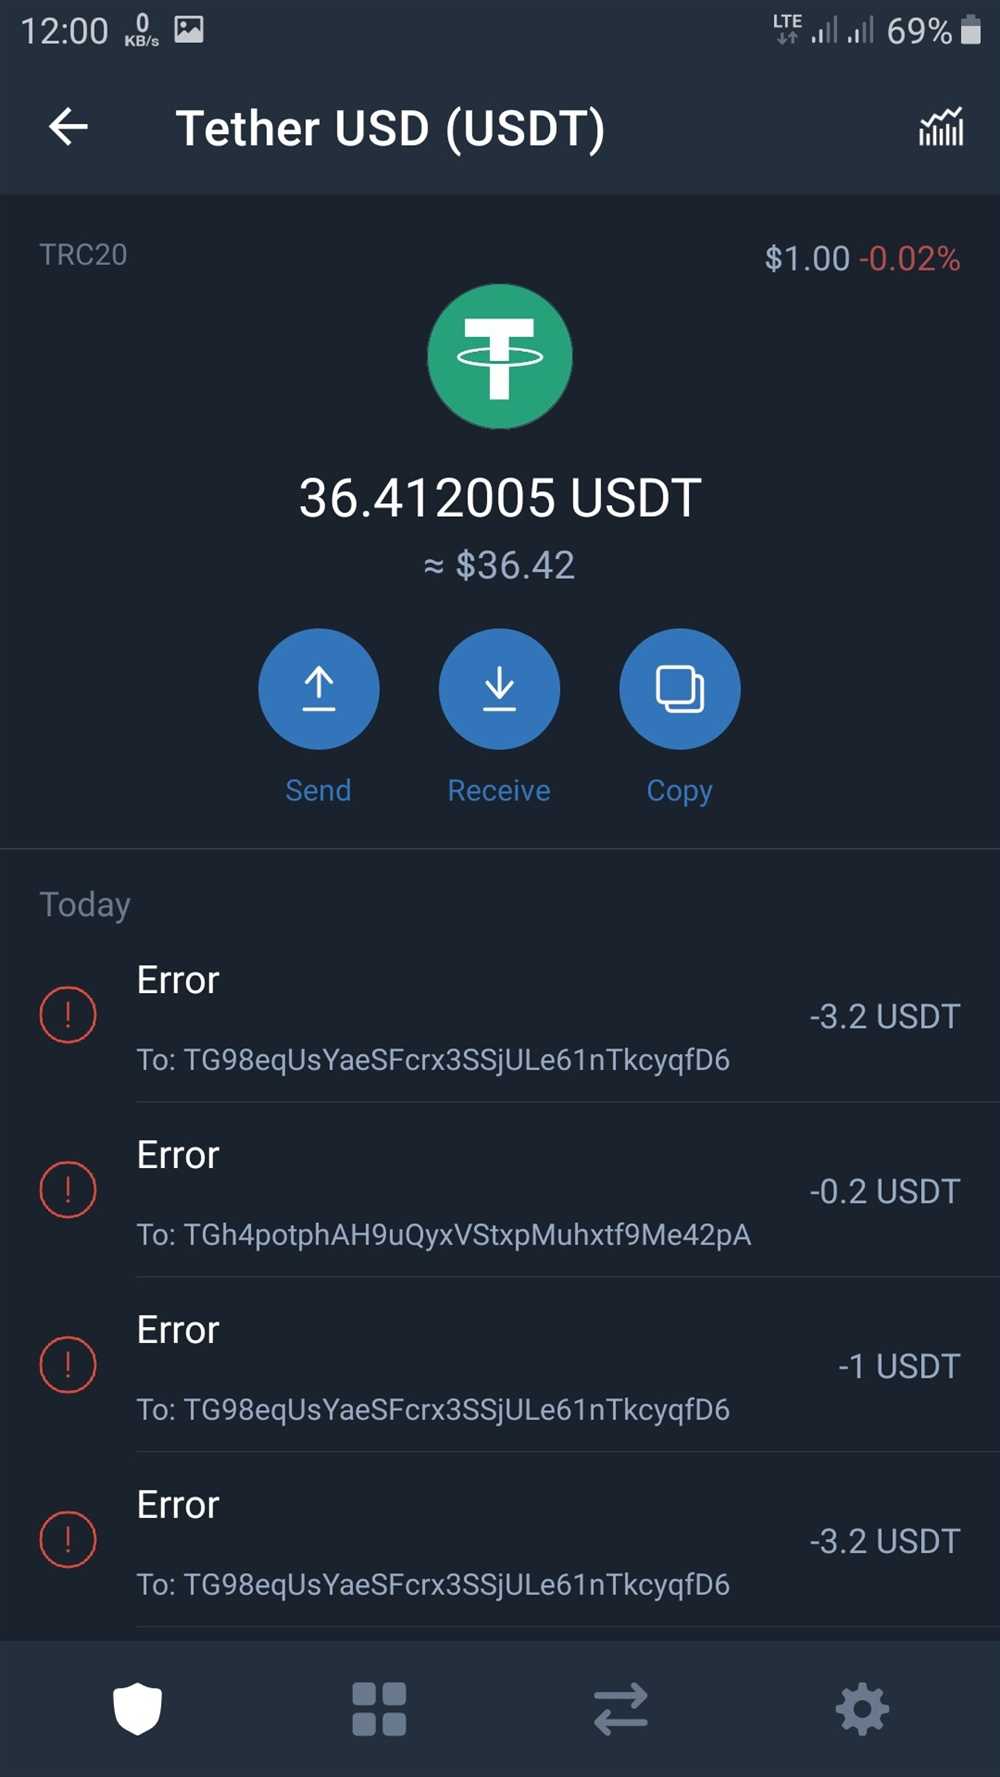 Common Misconceptions about Sending USDT to Any Wallet